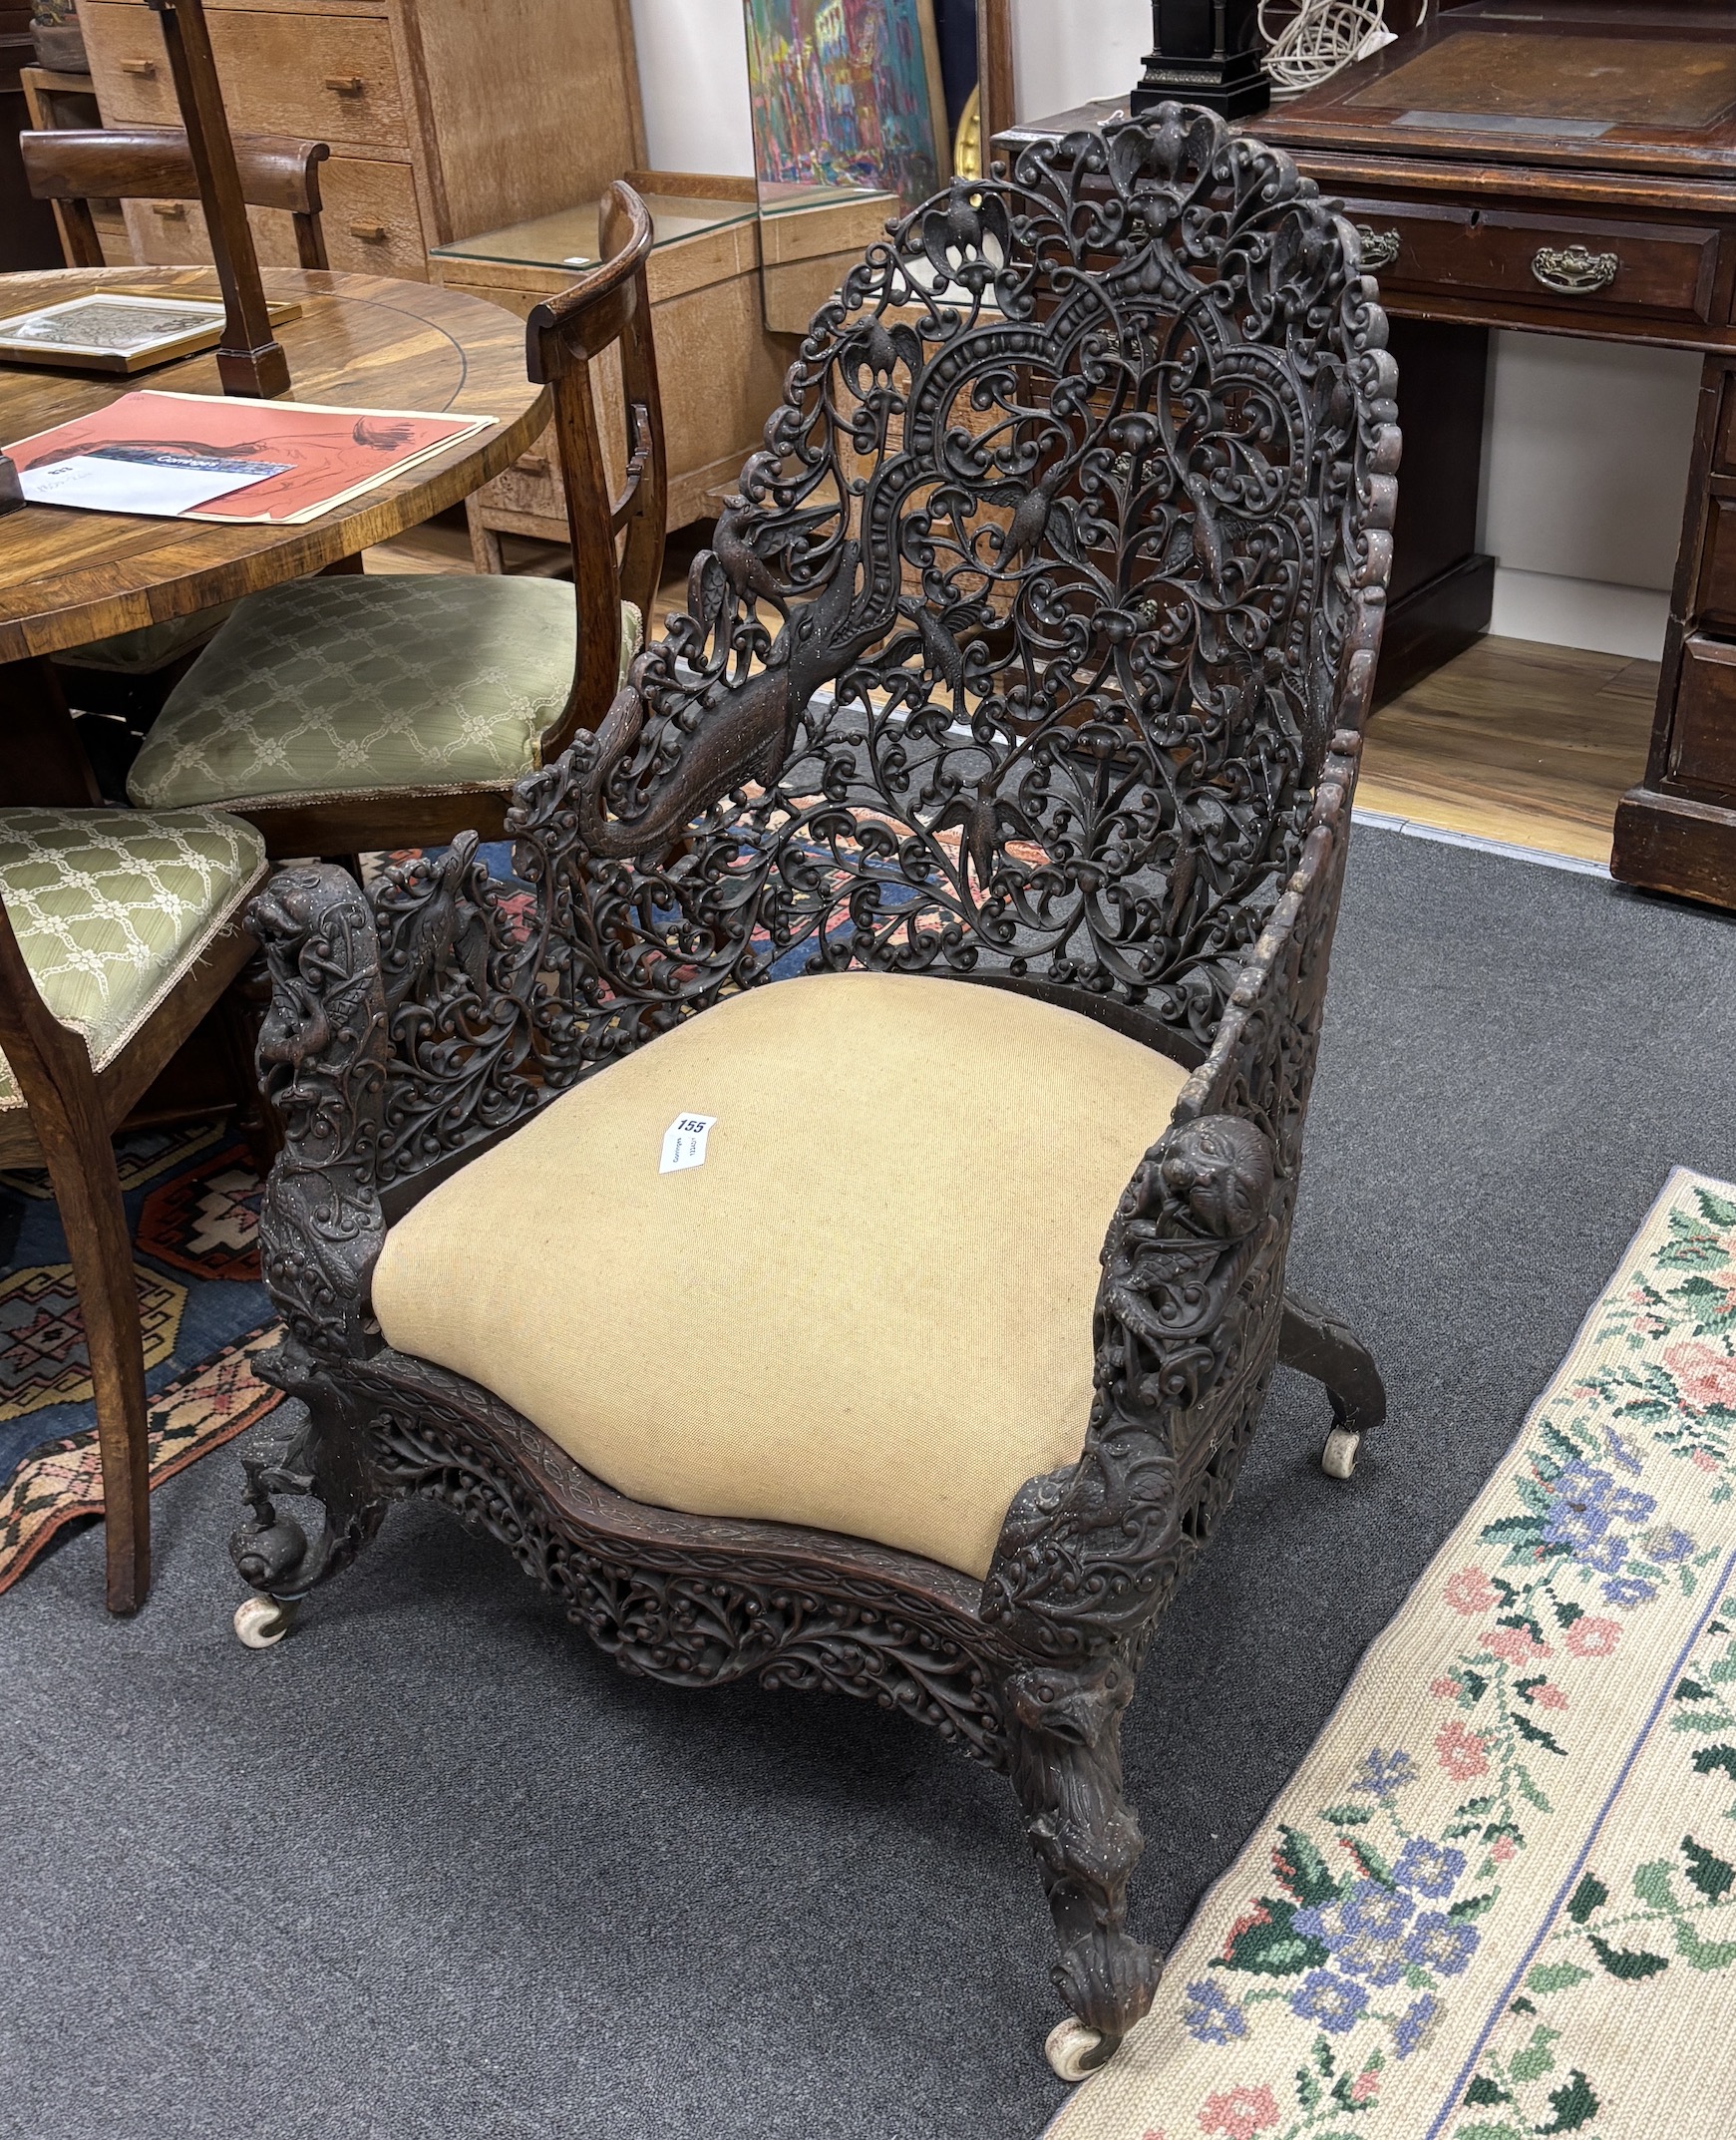 An Anglo Indian carved hardwood armchair, width 75cm, depth 58cm, height 100cm